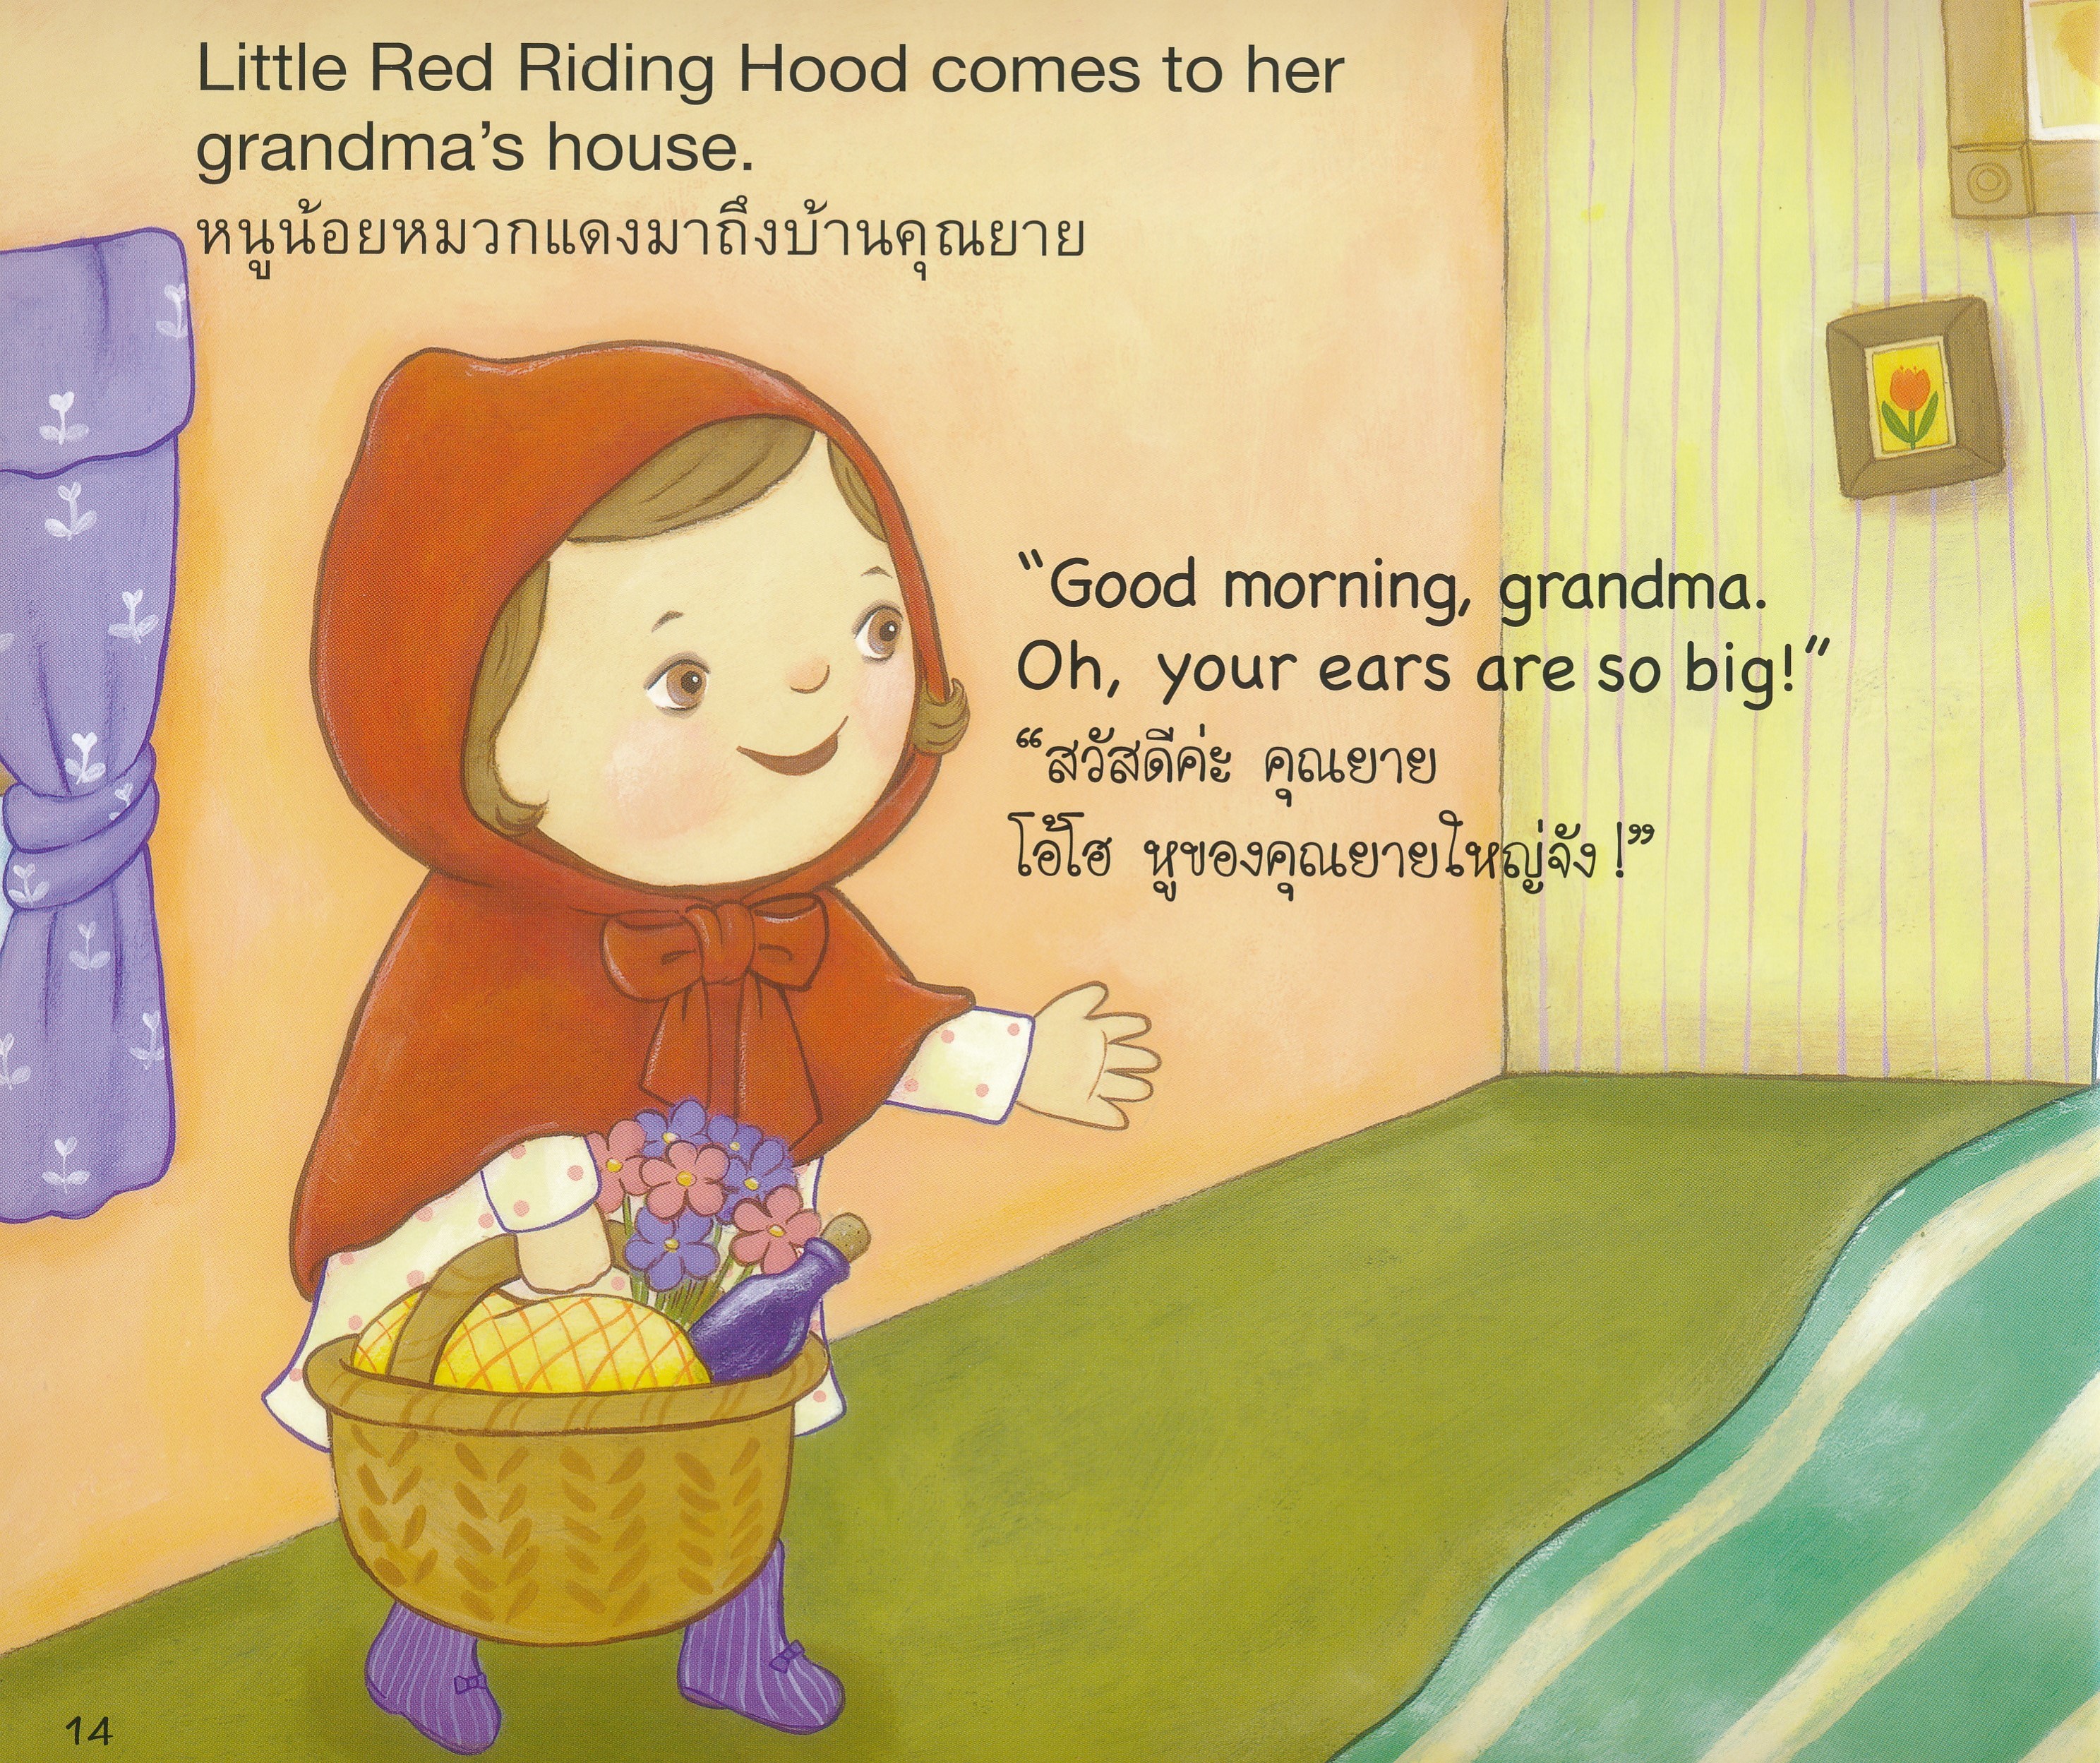 Easy & Fun Classic Stories Level 1 : Little Red Riding Hood  + Audio CD